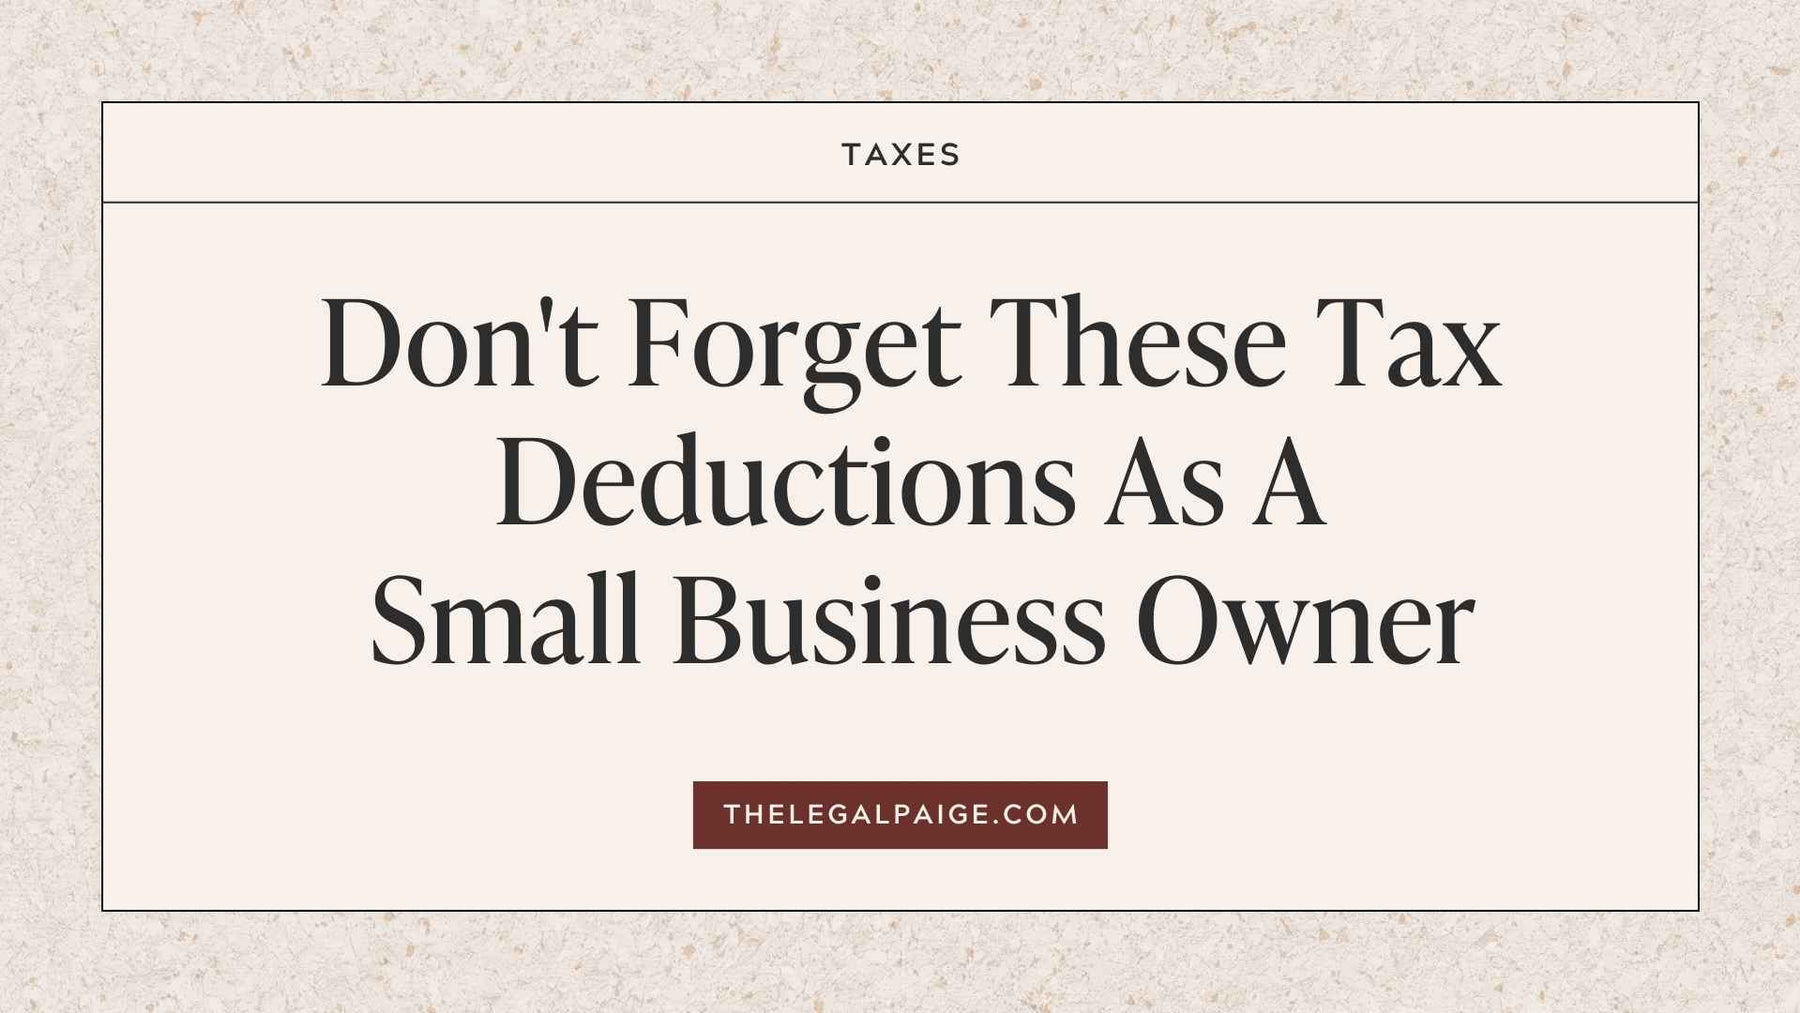 Don't Forget These Tax Deductions As A Small Business Owner